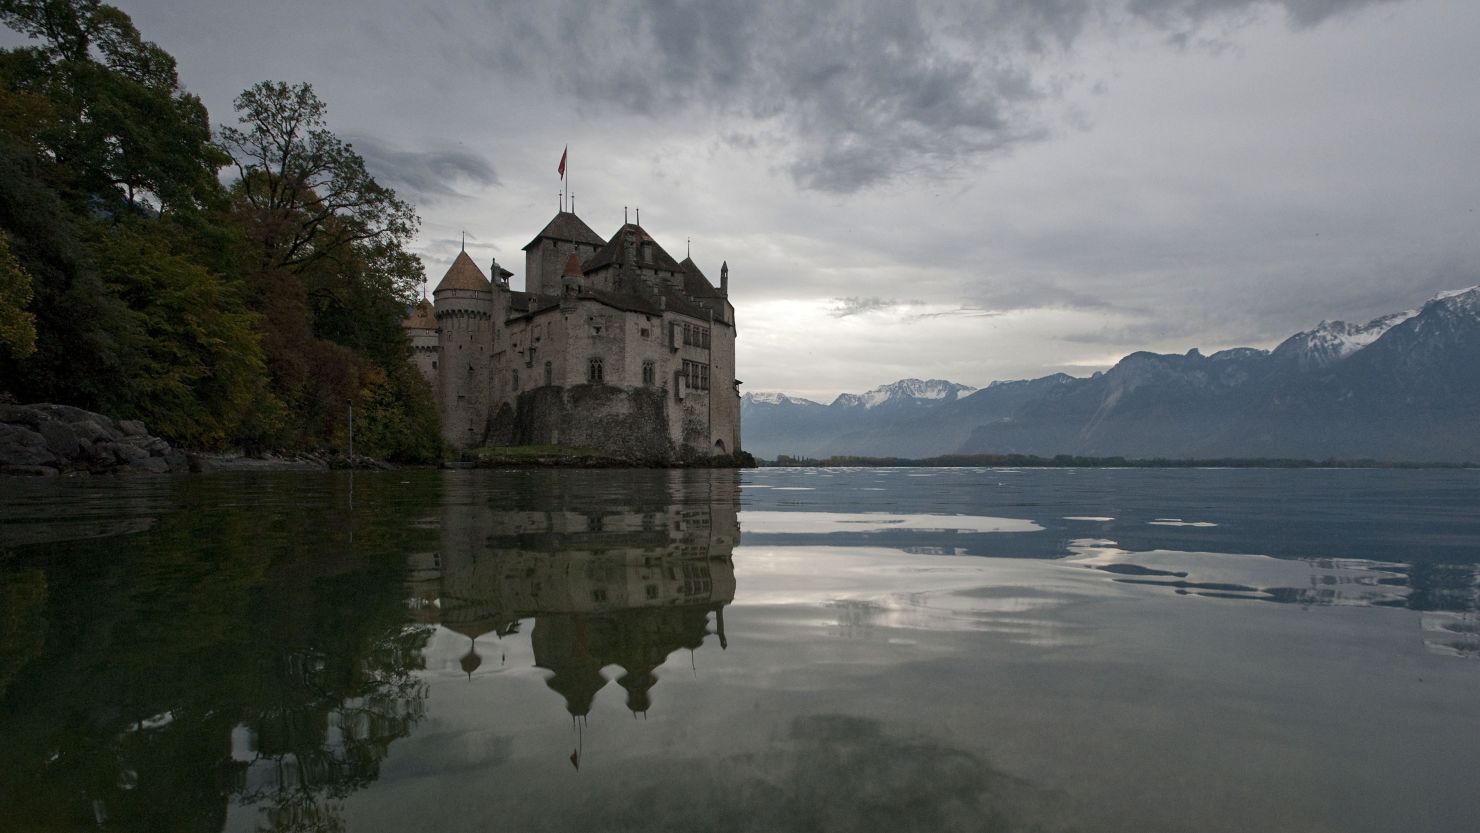 The Chillon Castle near the town of Montreux on the banks of Lake Geneva.